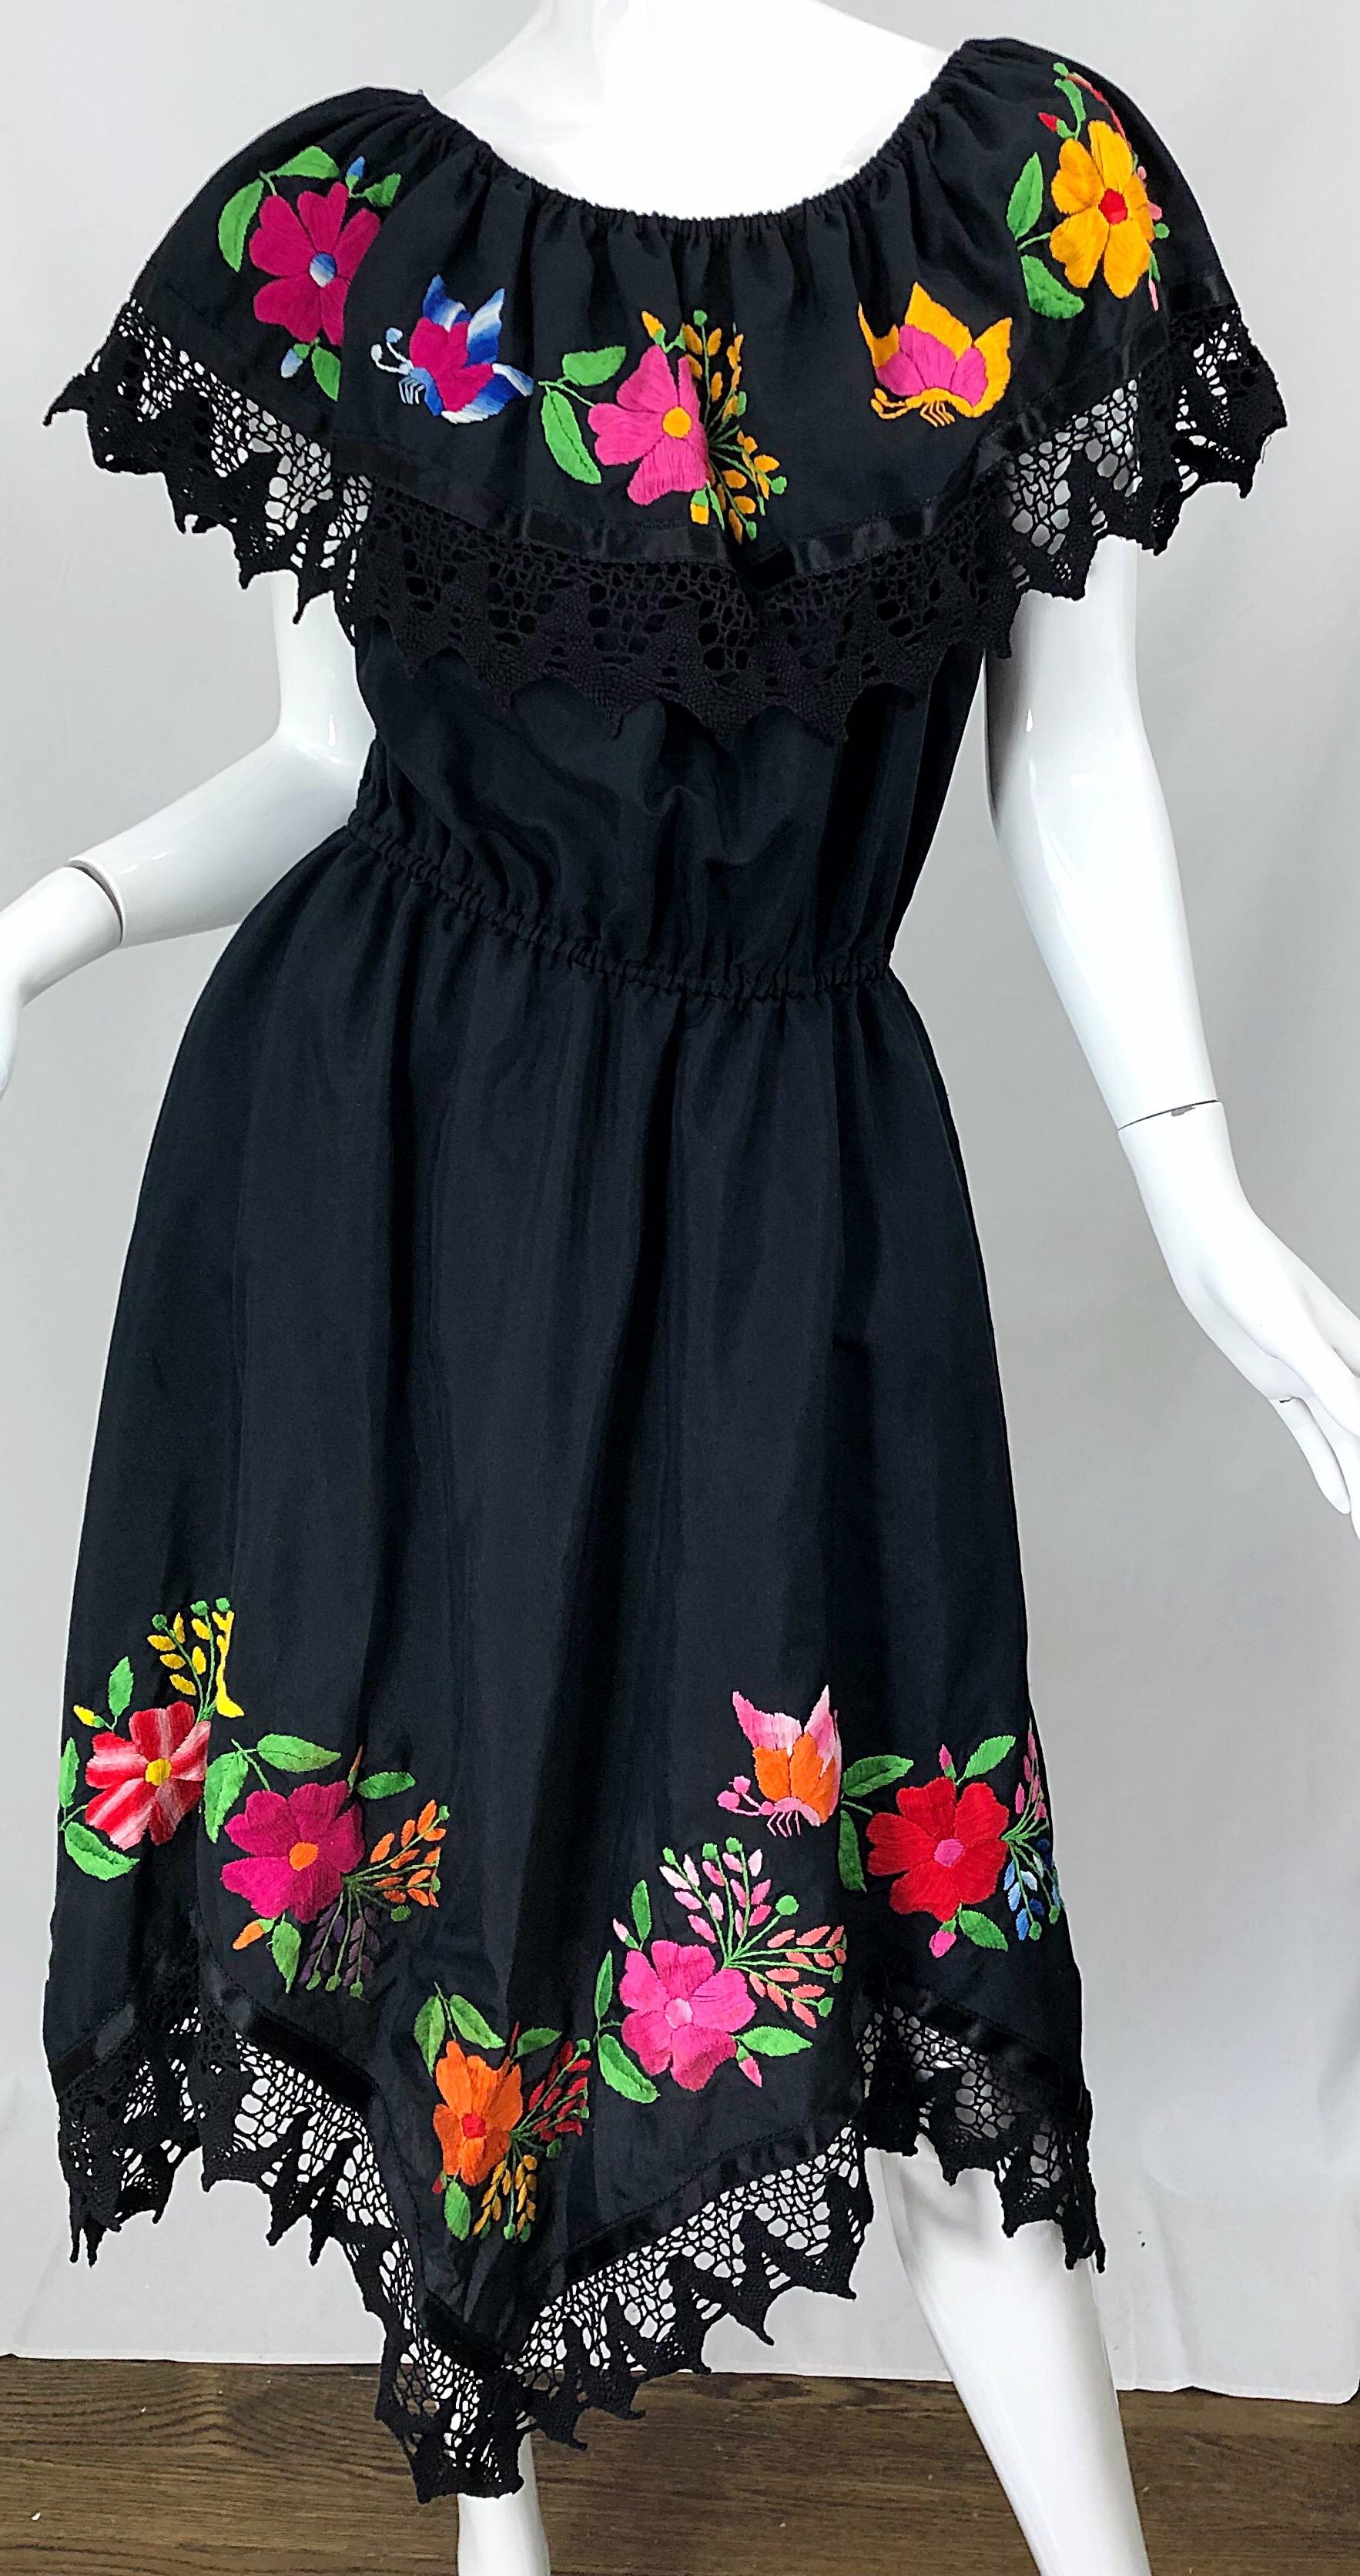 Boho chic 1970s / 70s black cotton embroidered Spanish style dress! The beauty about this dress is that it can be worn two ways, as pictured. It can be worn on or off the shoulders, and looks equally as good either way. Bright flowers in pink,